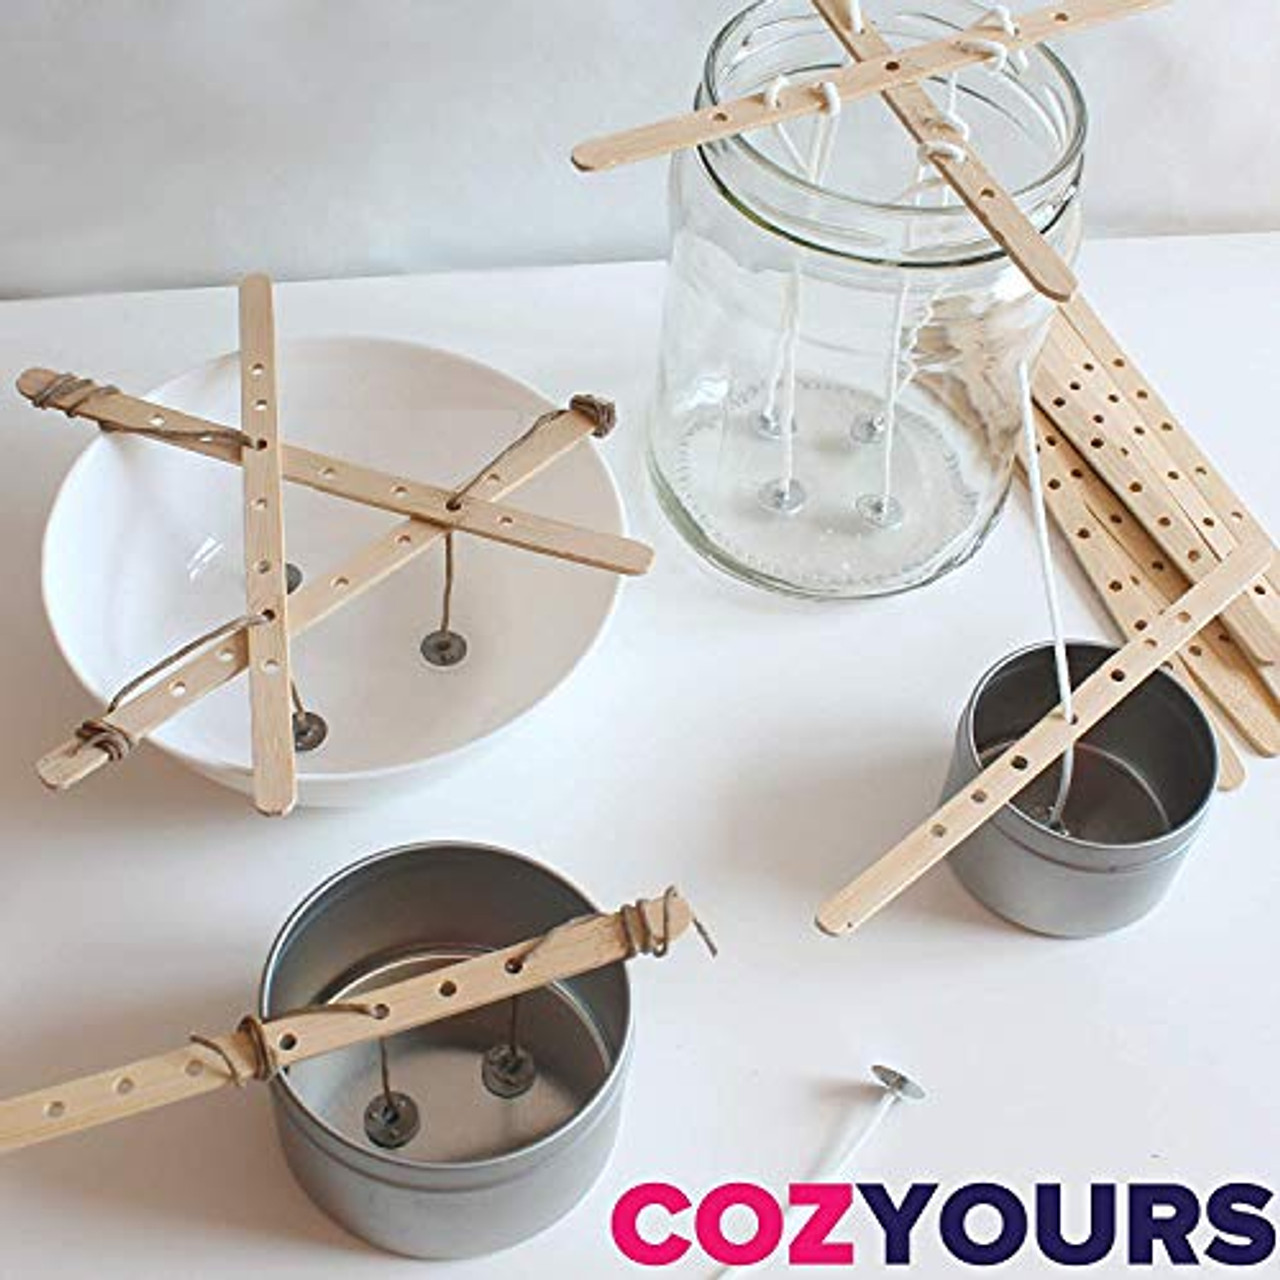 Cozyours Wooden Candle Wick Holders for Large & Multiwick Candles